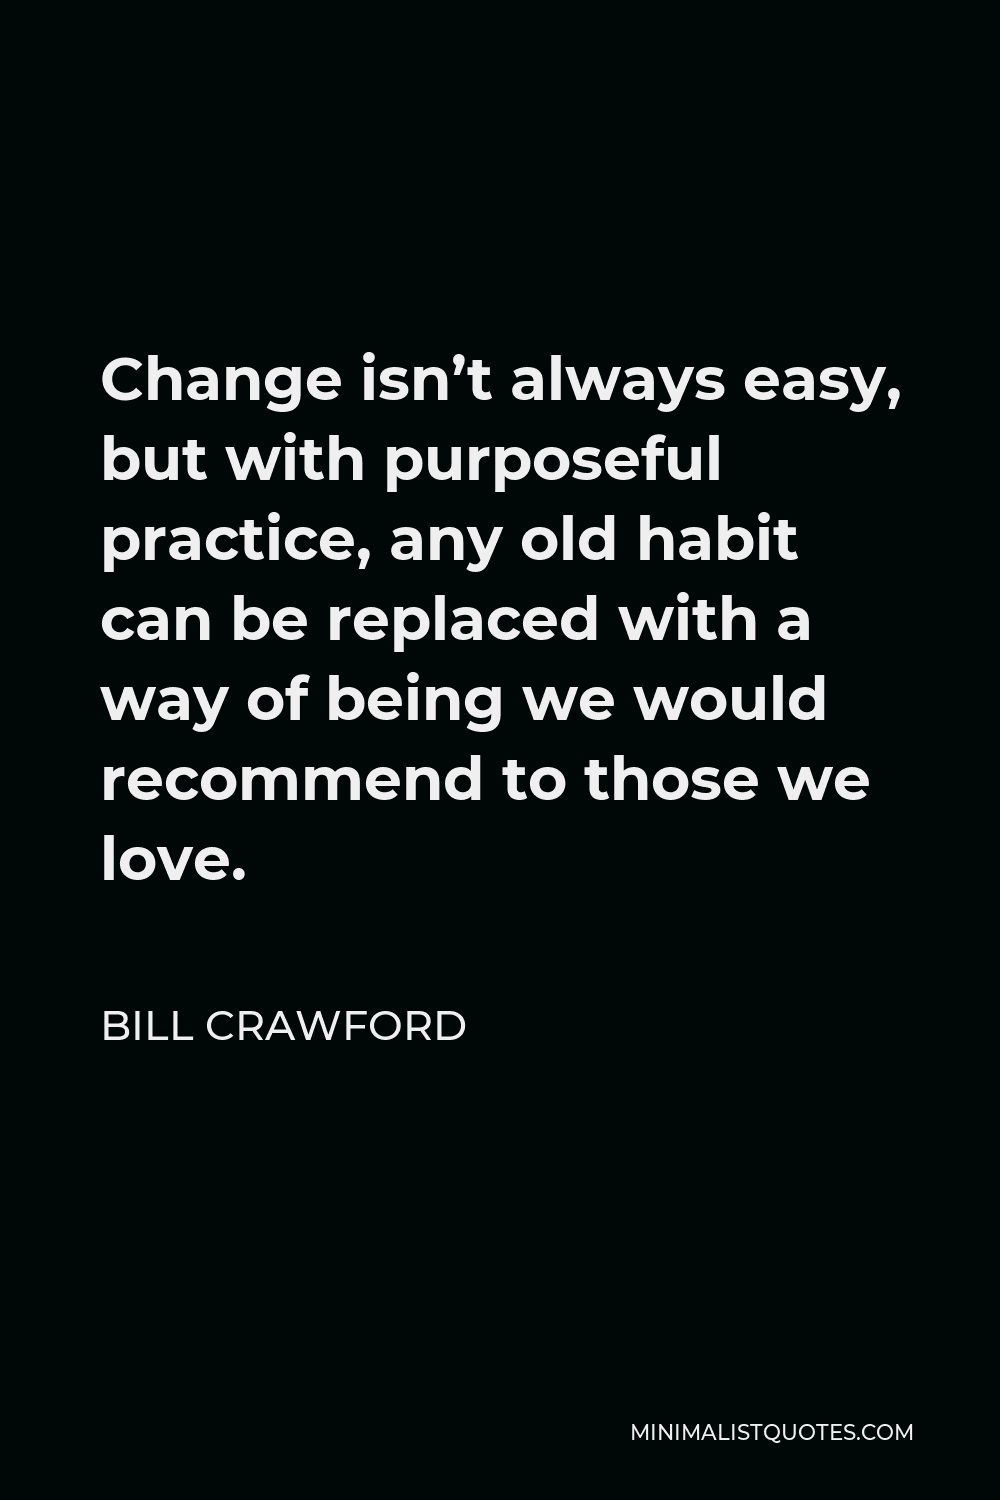 Bill Crawford Quote - Change isn’t always easy, but with purposeful practice, any old habit can be replaced with a way of being we would recommend to those we love.